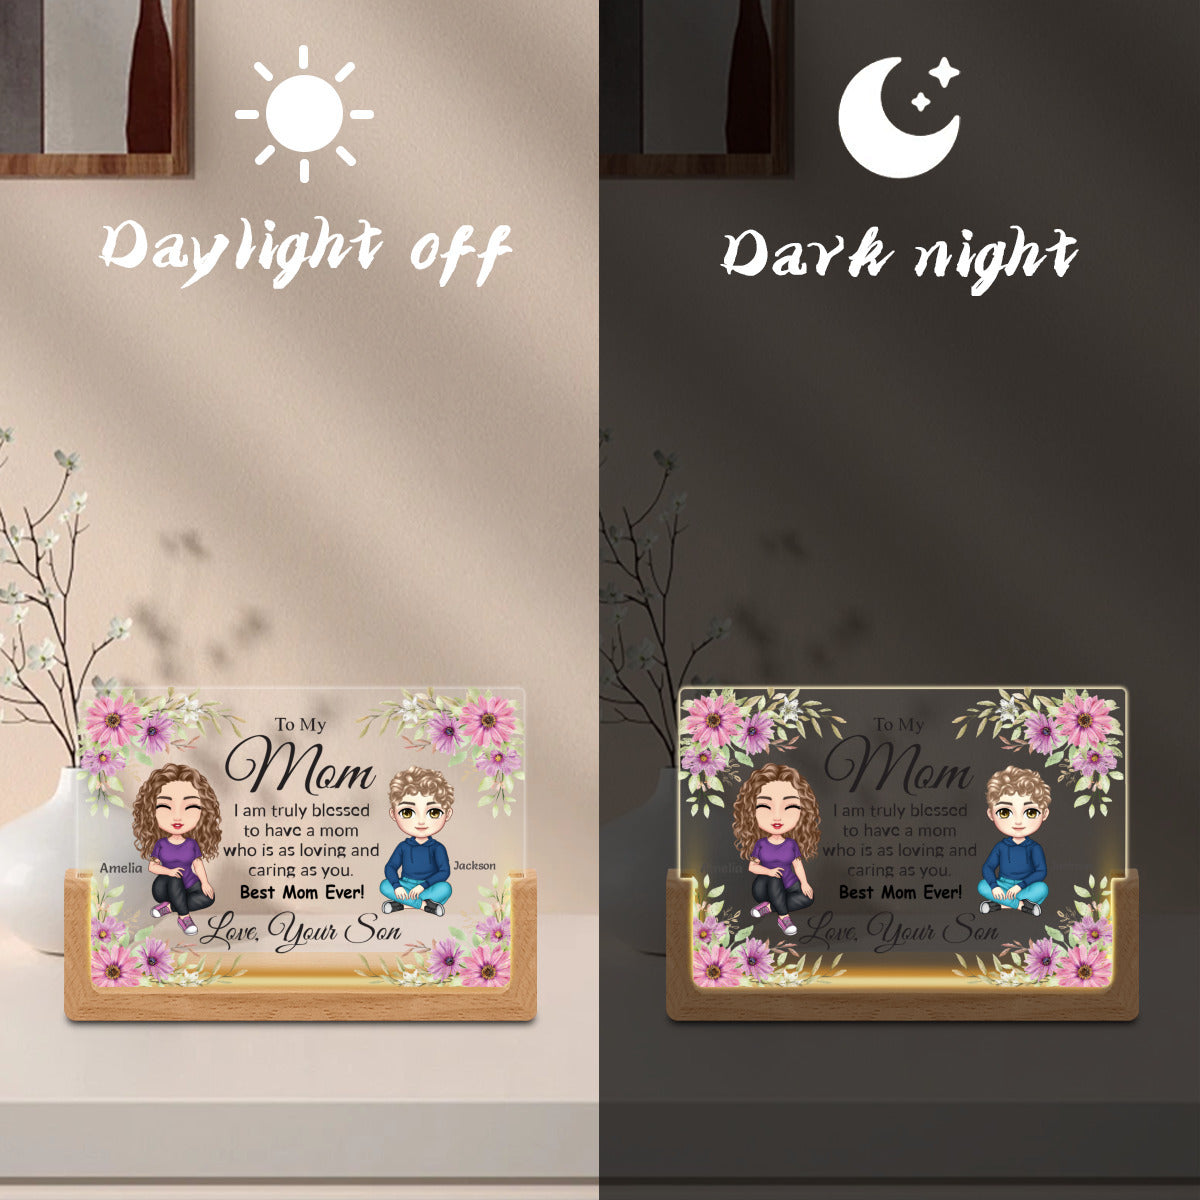 I am Truly Blessed to Have a Mom-Personalized Acrylic Plaque Night Light for Mom